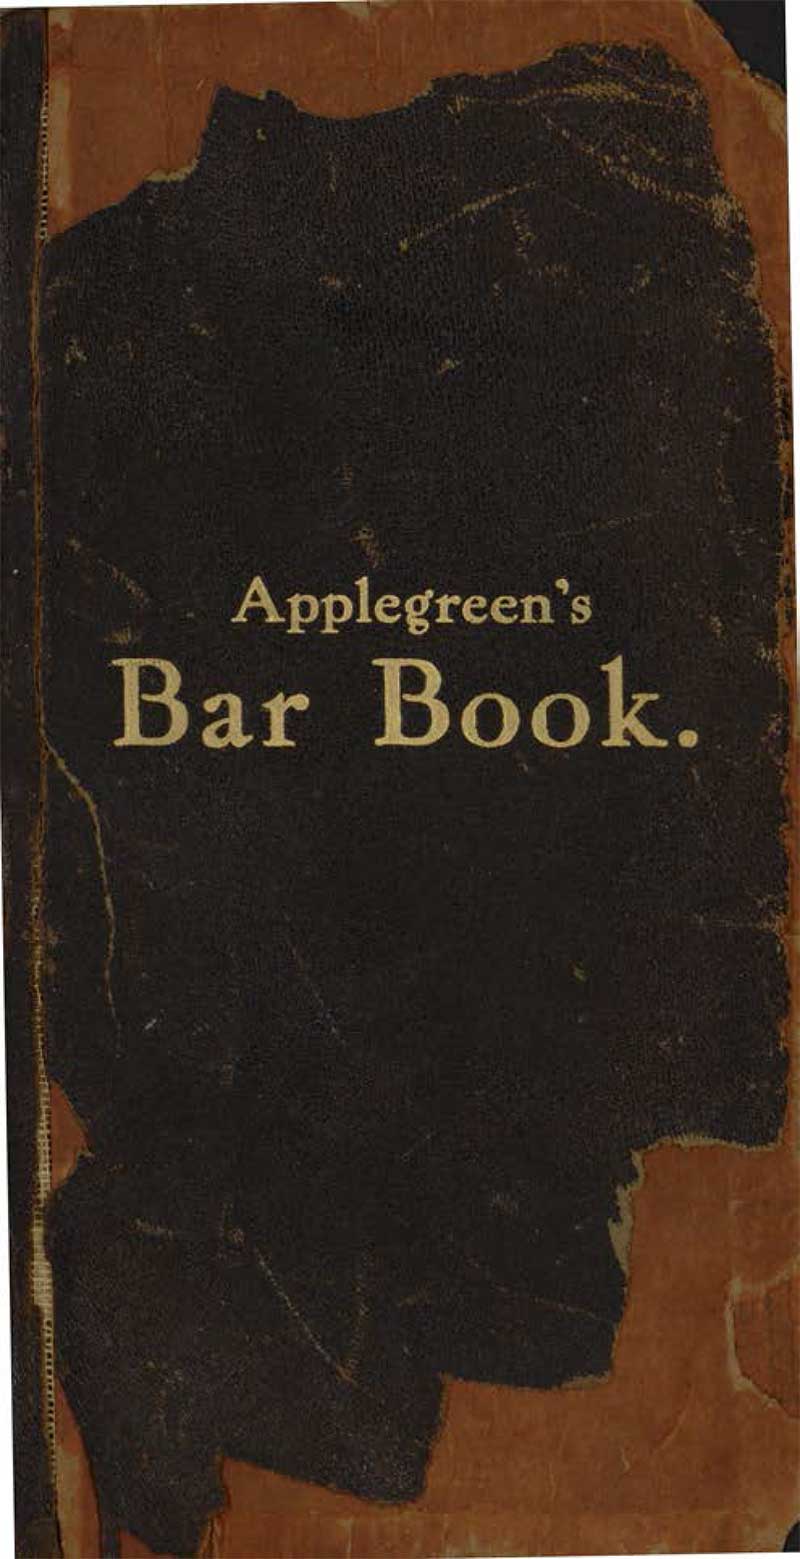 Applegreen's Bar Book or How To Mix Drinks (1909)